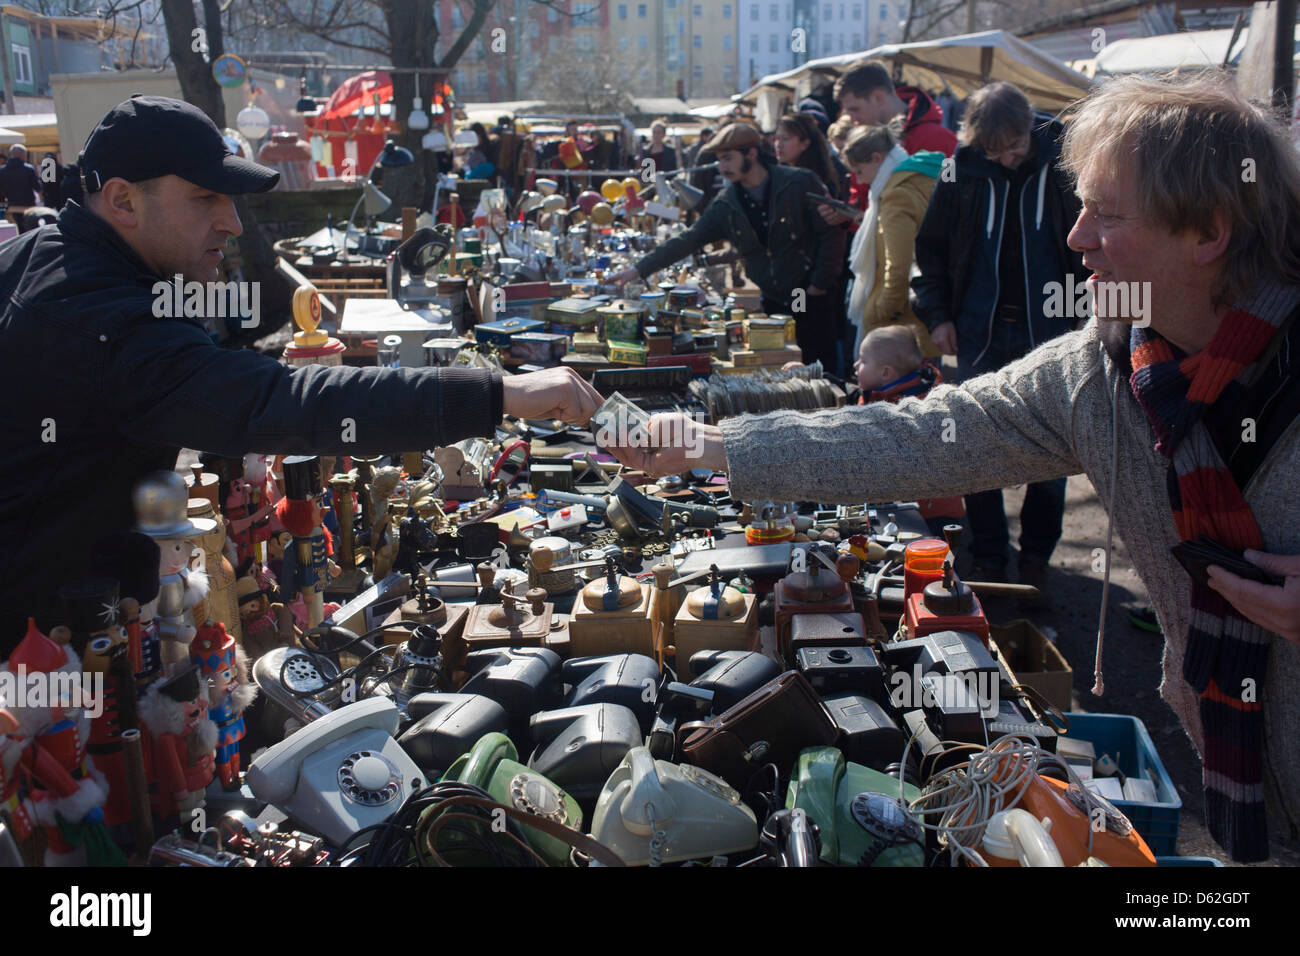 Euros changing hands for bric-a-brac and old possessions, sold at a giant market in Mauerpark - an open space on the site of the old Berlin wall, the former border between Communist East and West Berlin during the Cold War. Stock Photo